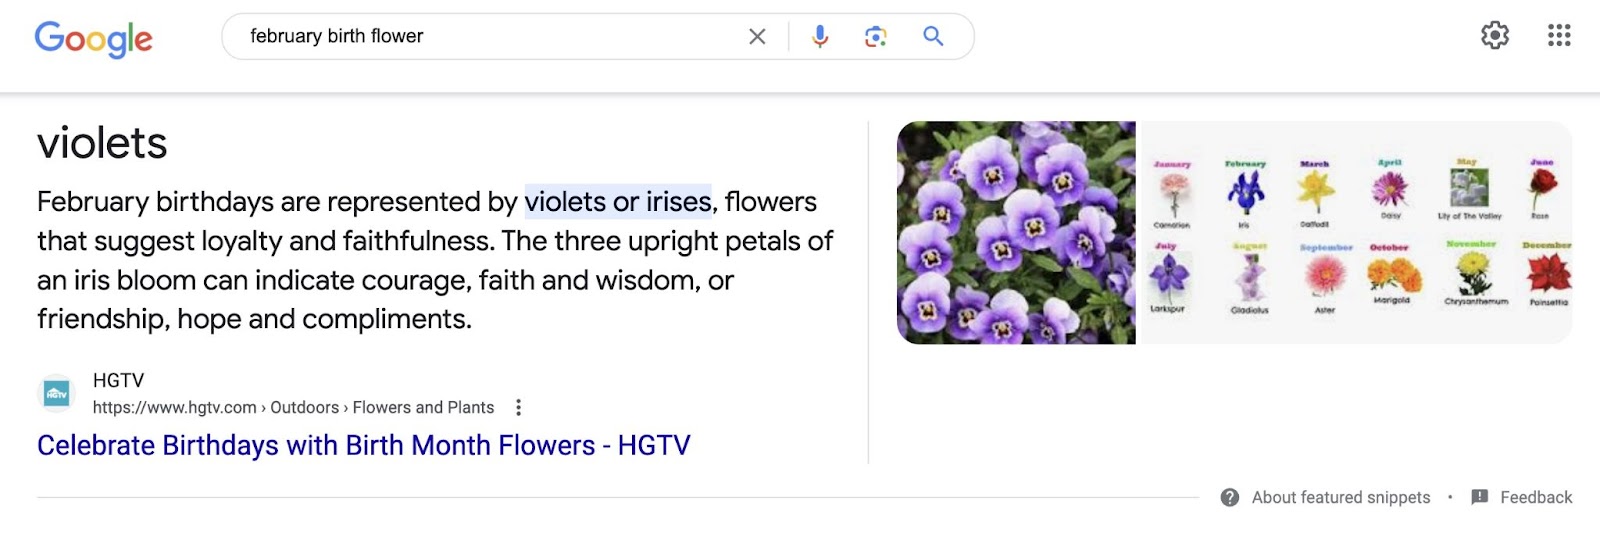 A featured snippet for “february birth flower" query